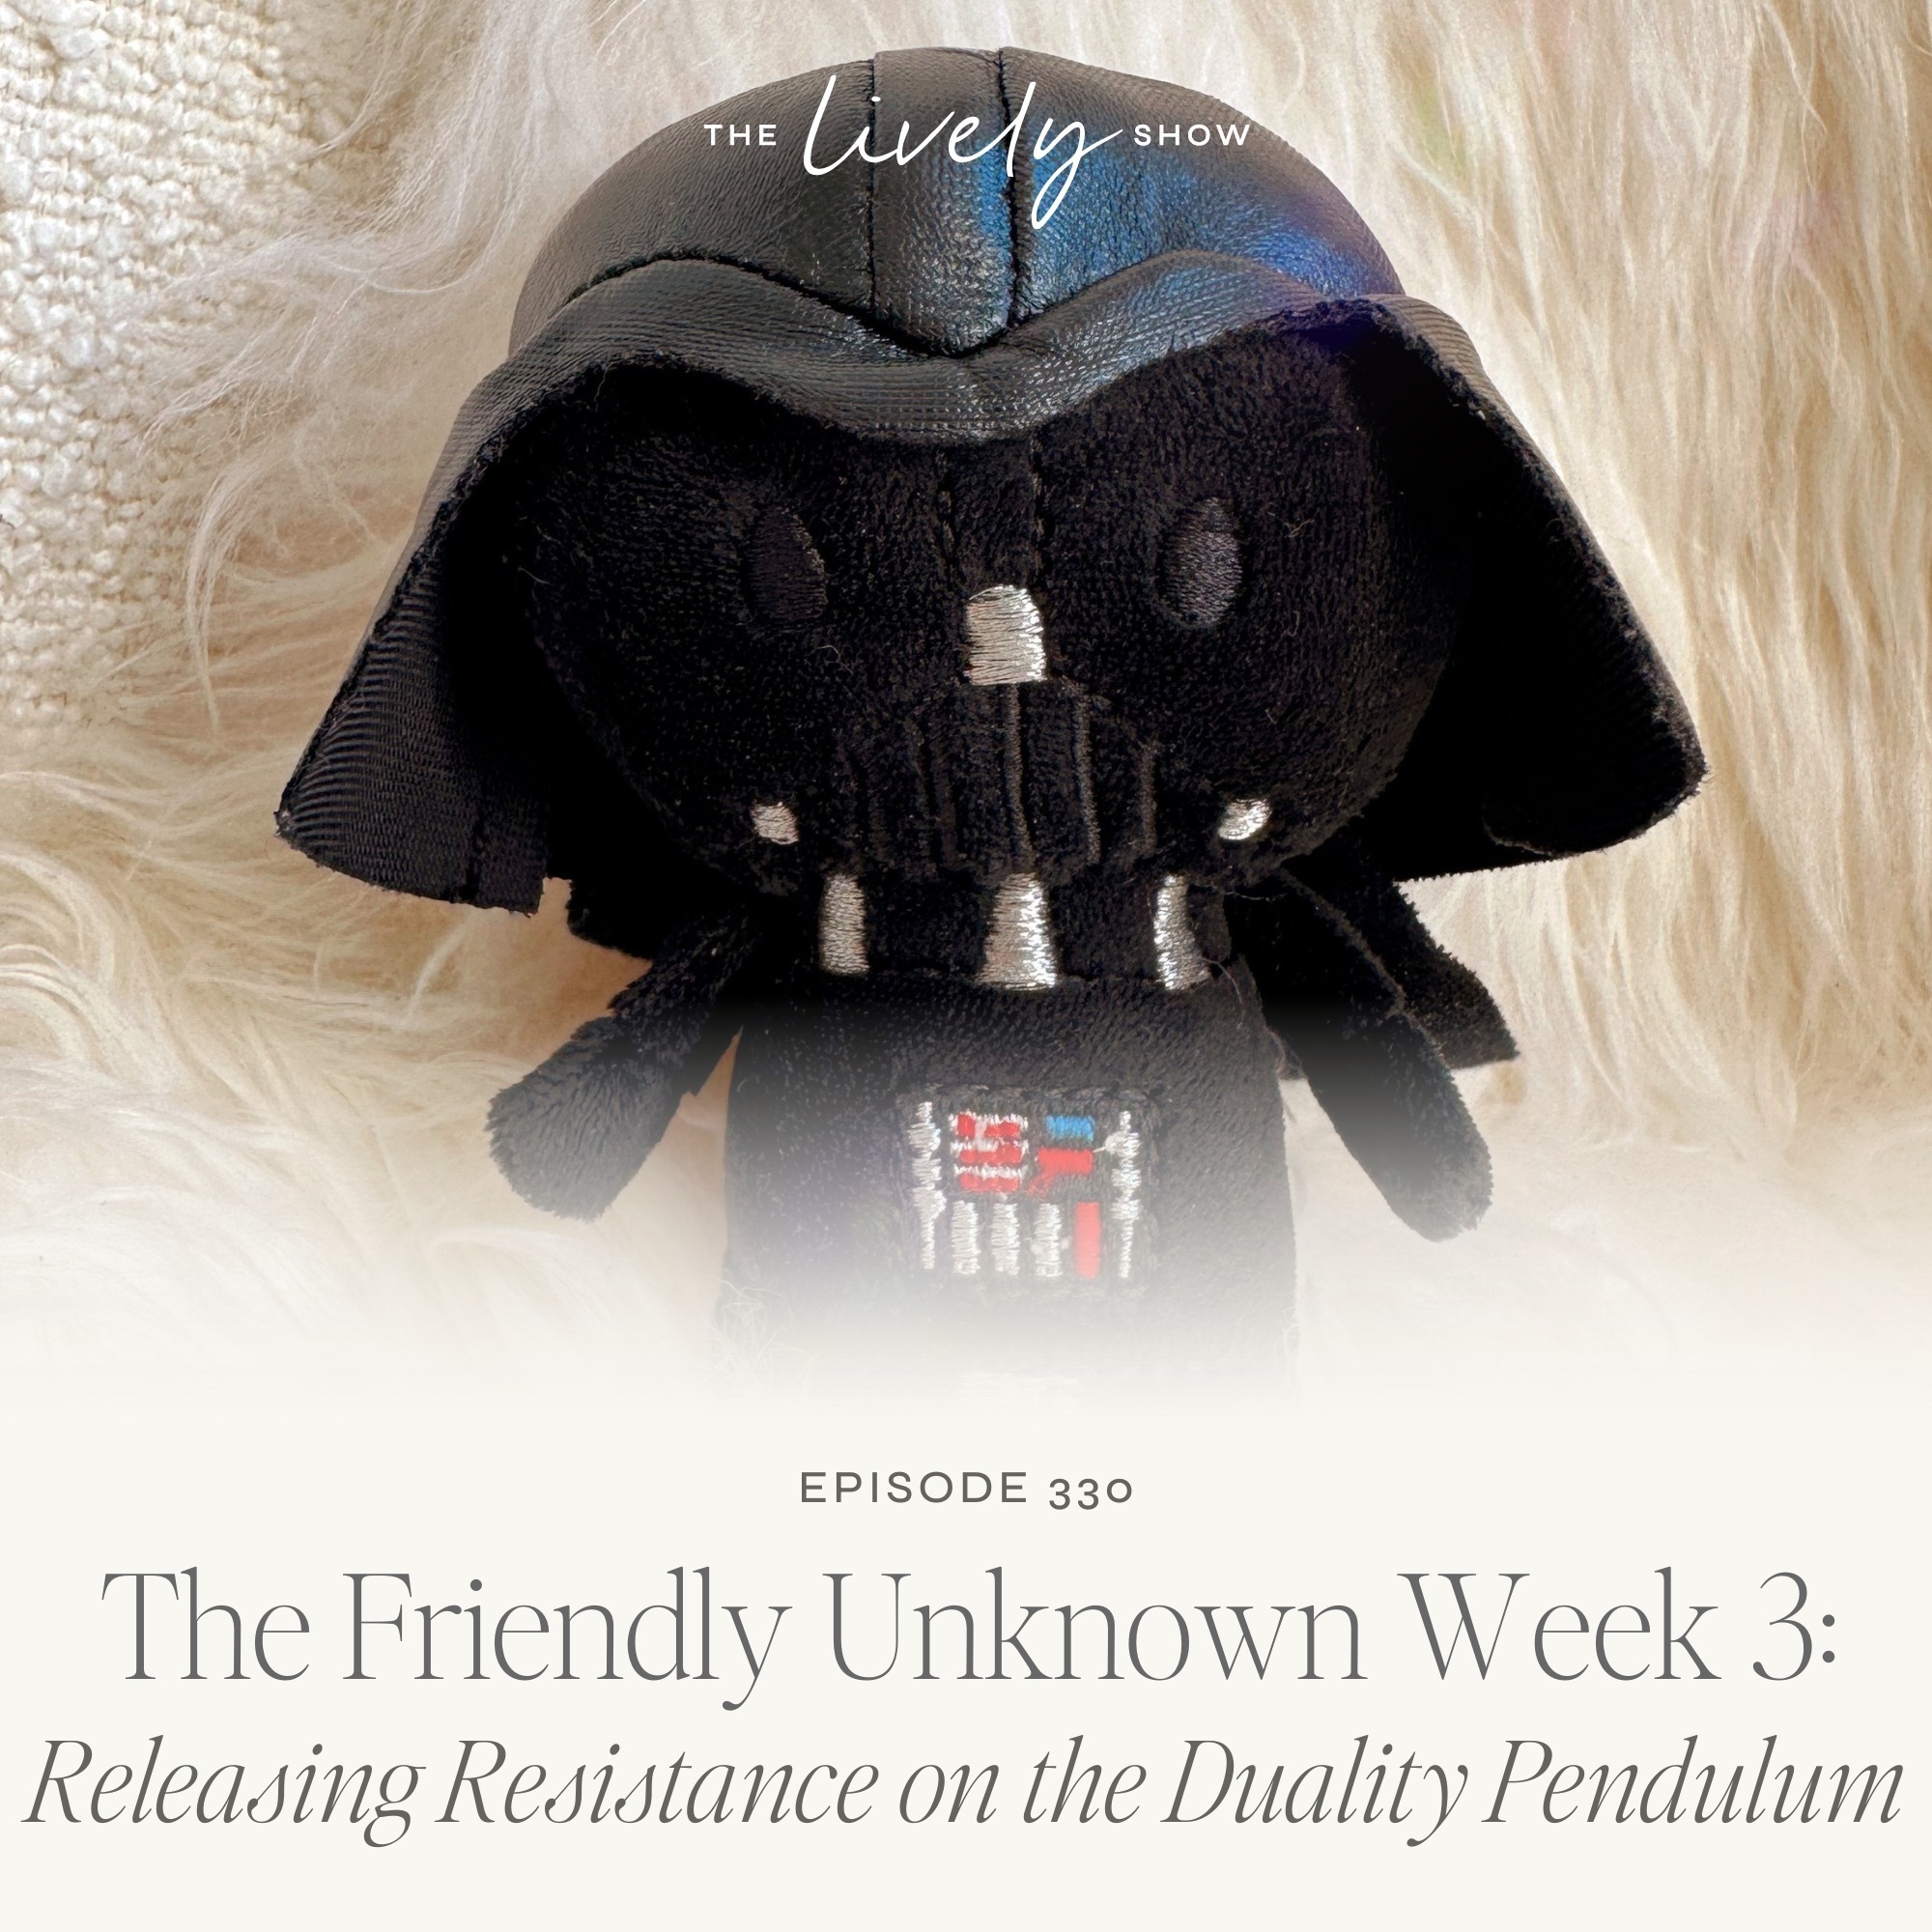 TLS 430 The Friendly Unknown Week 3: Releasing Resistance on the Duality Pendulum.